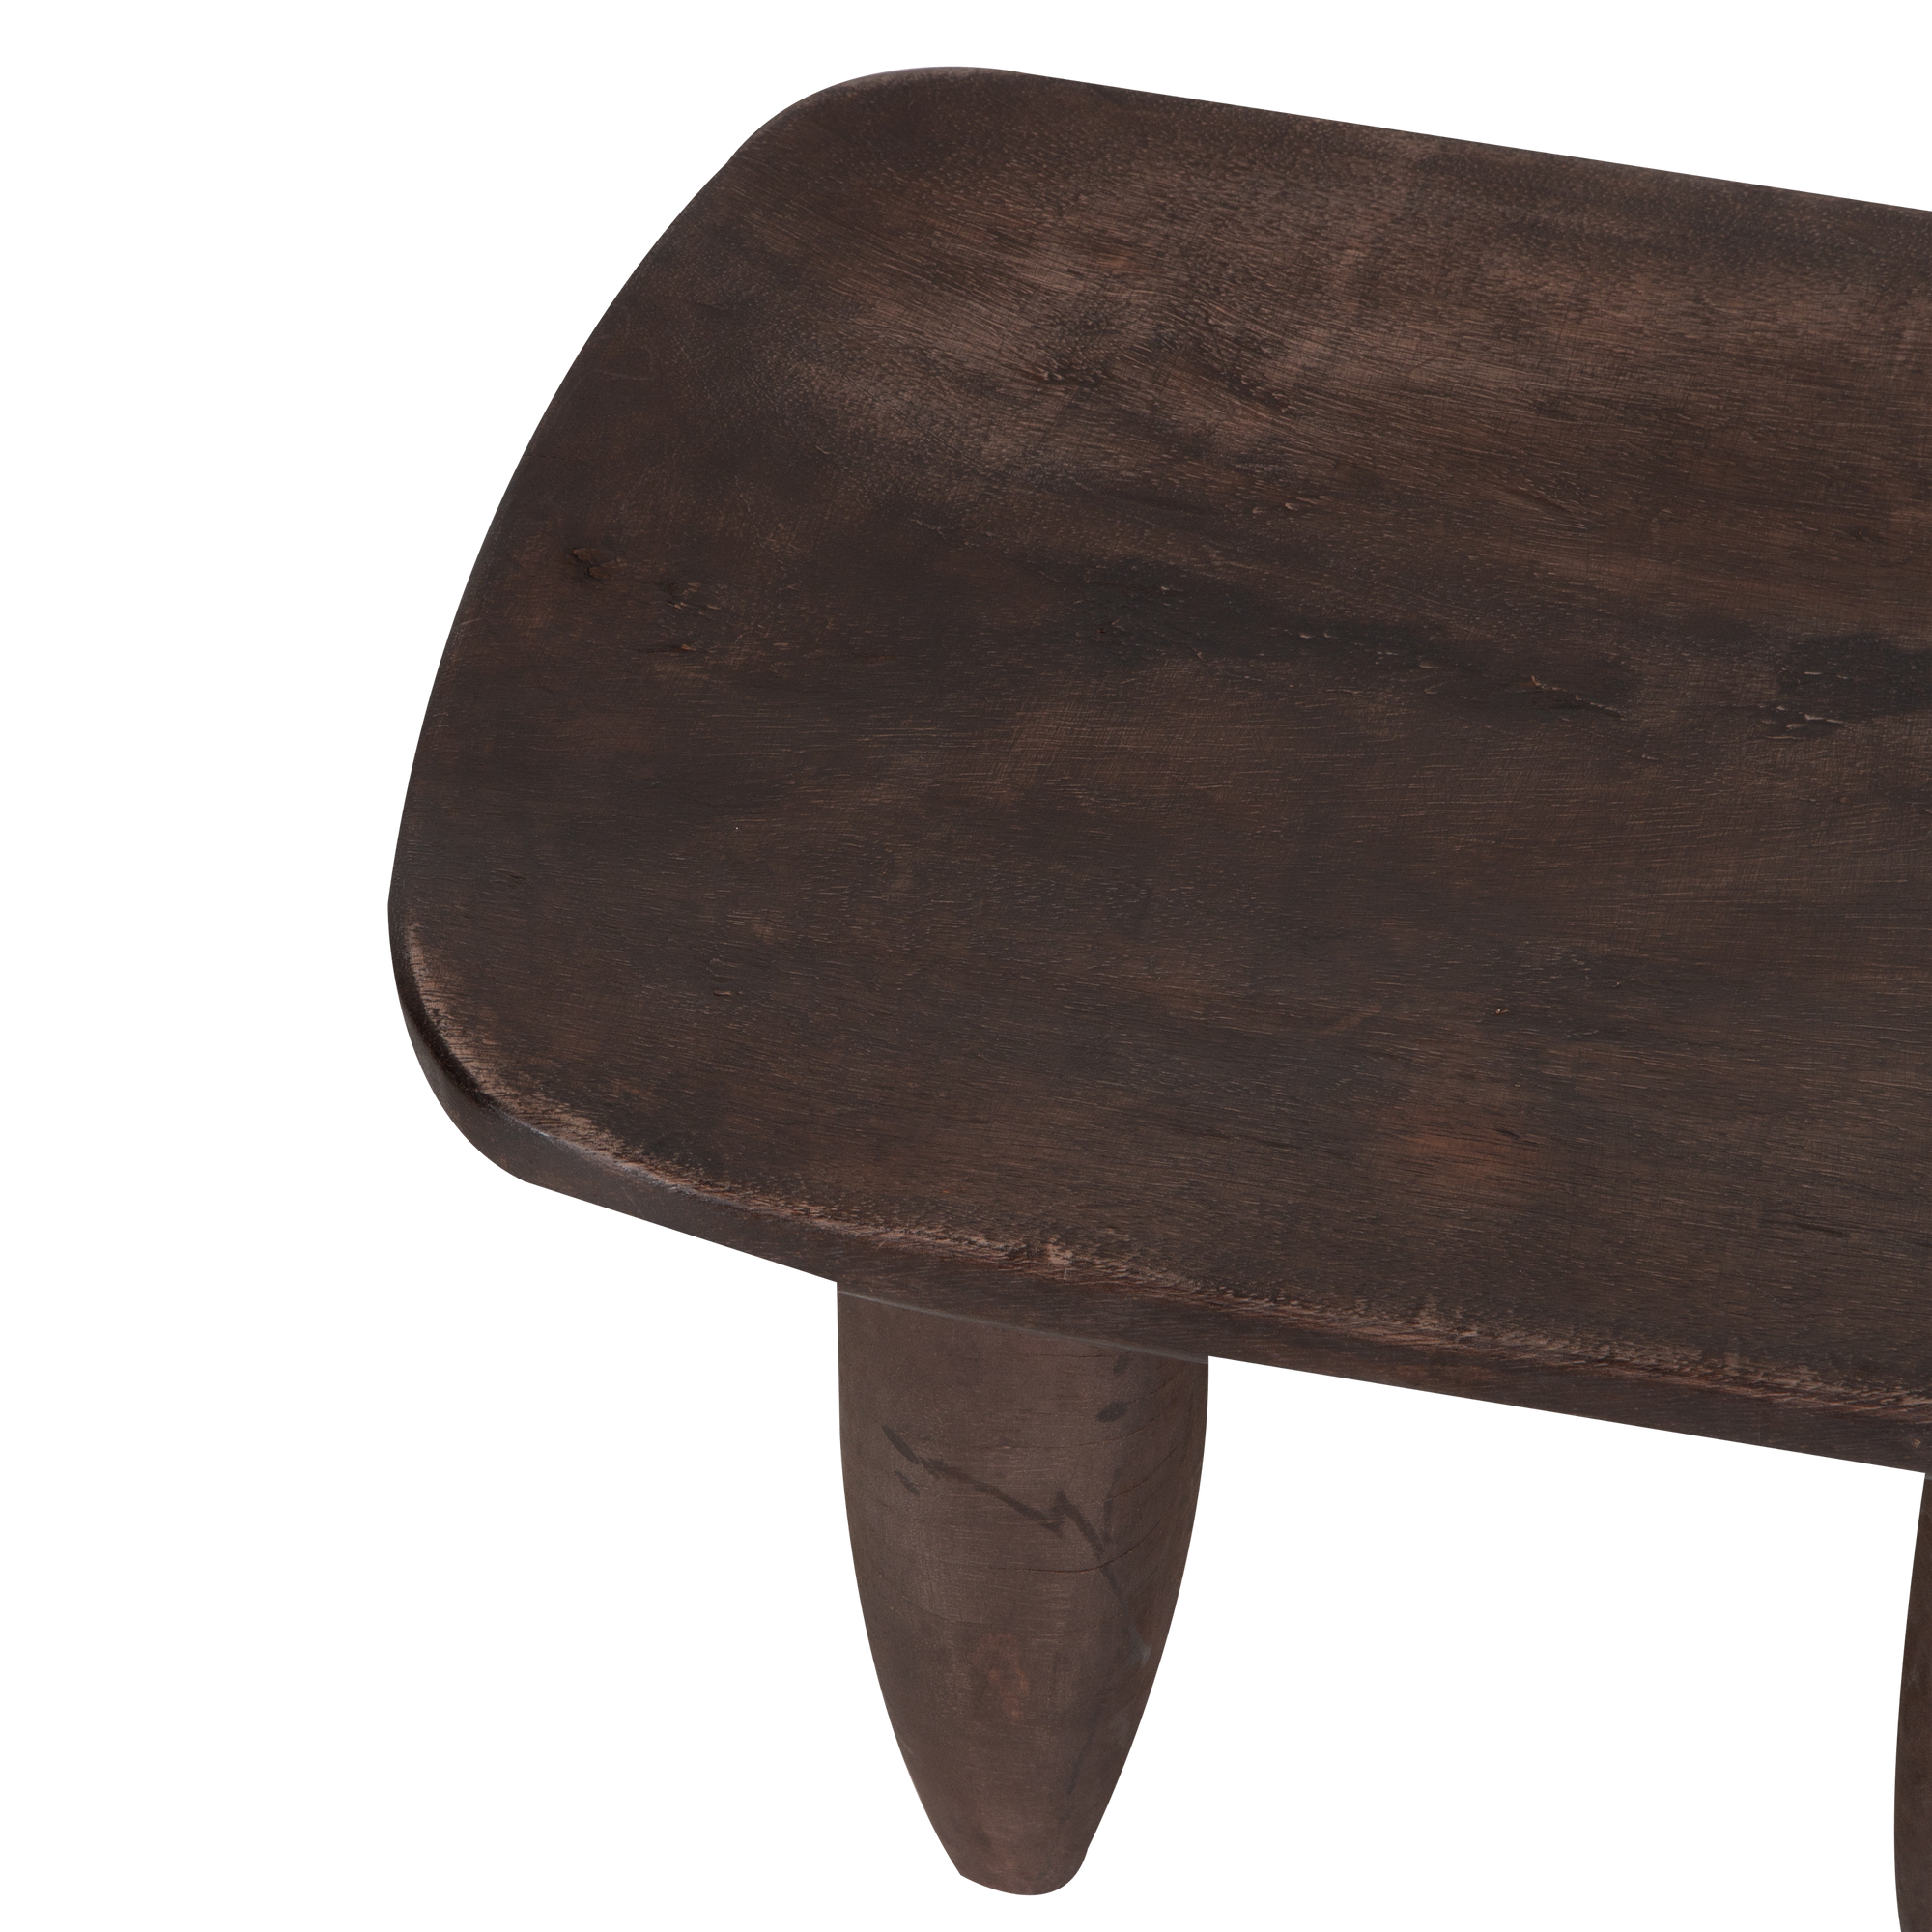 A beautiful vintage find, the Senufo Stool was sourced from the Ivory Coast and was constructed by the Senofu tribe.